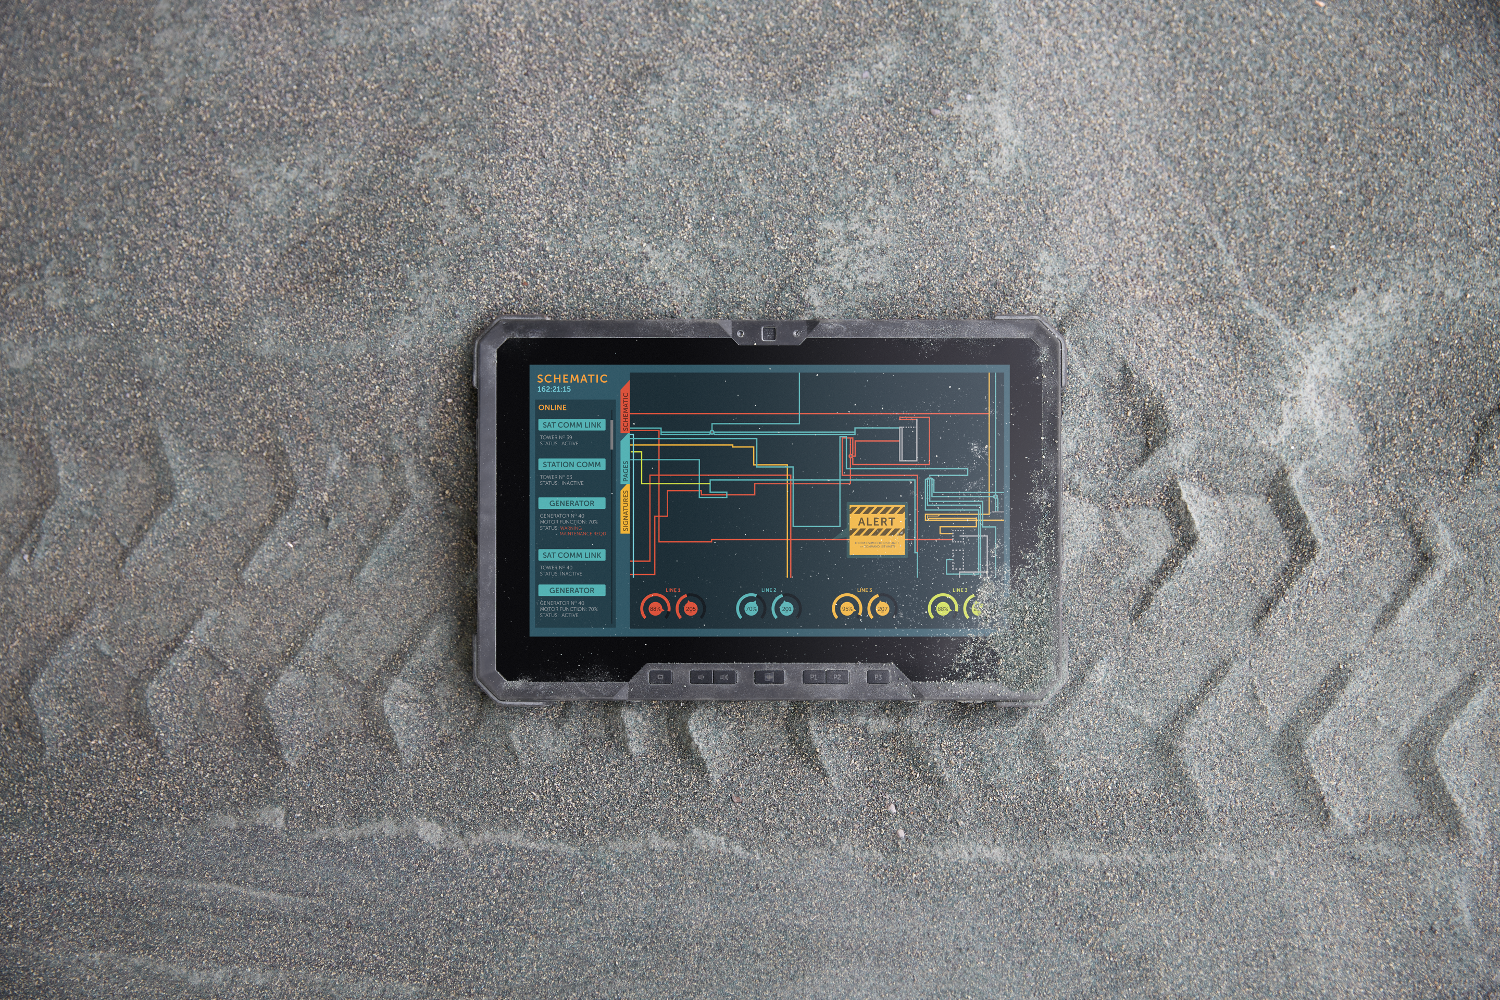 tough stuff dells new latitude 12 rugged tablet is the right tool for any job header